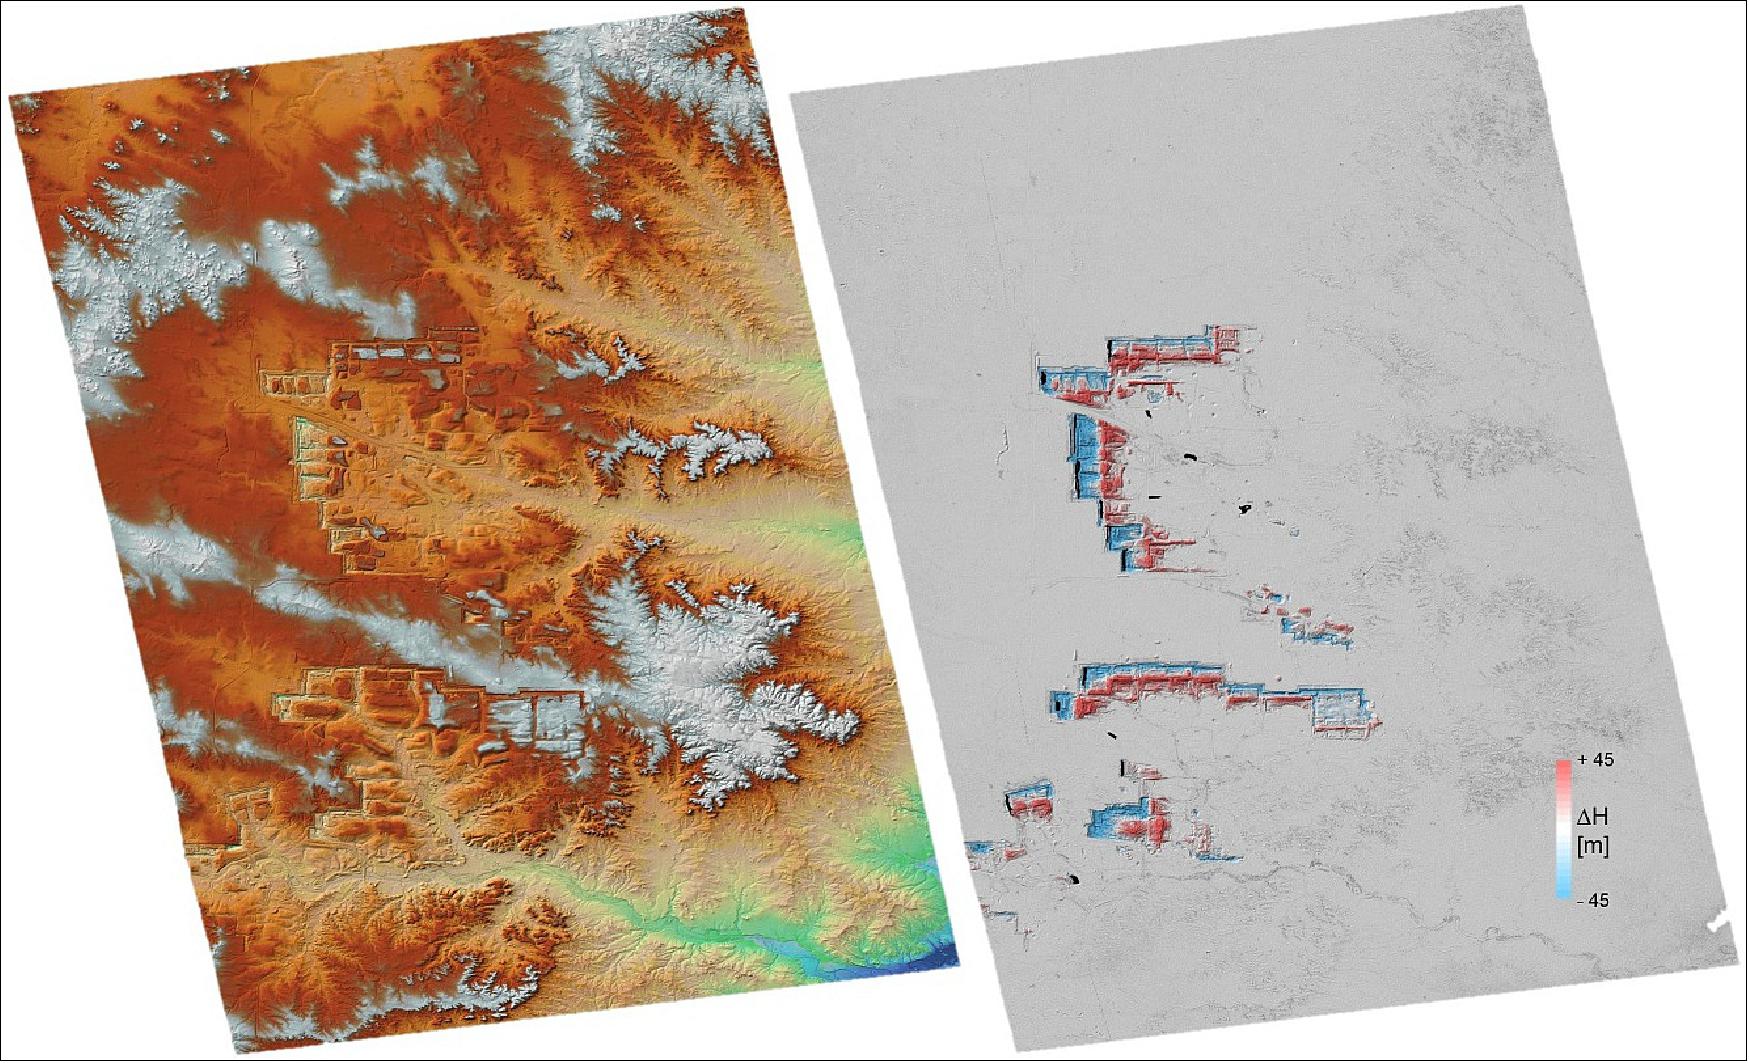 Figure 34: TanDEM-X Raw-DEM of an open pit mining in Wyoming, USA (left) and a three-dimensional change map with 6 m x 6 m resolution from 2016 (right), image credit: DLR